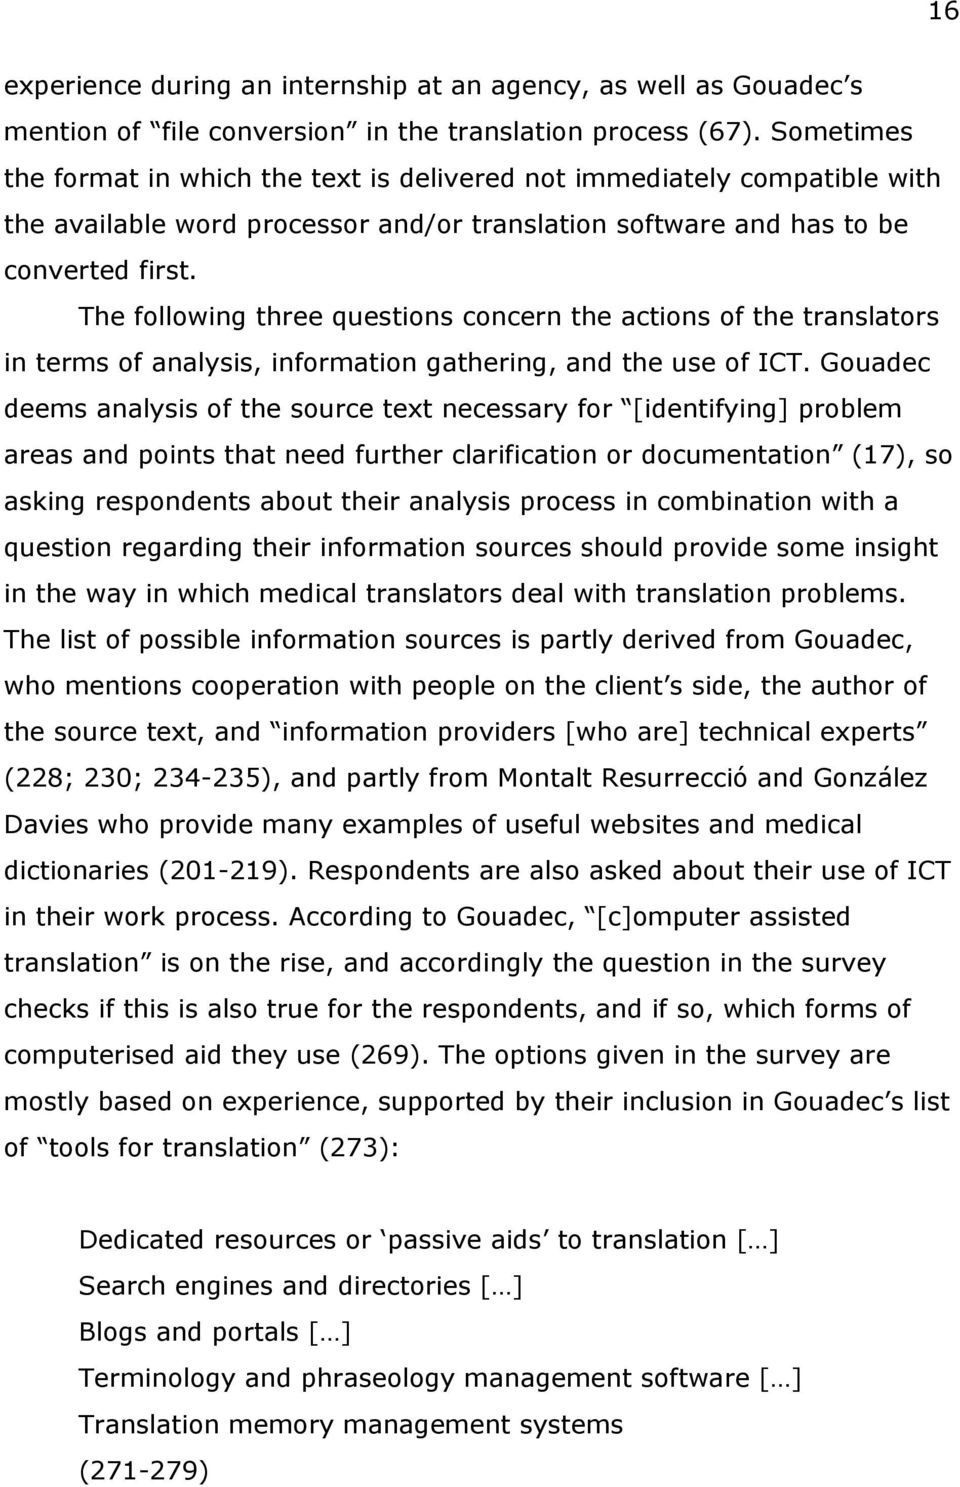 The following three questions concern the actions of the translators in terms of analysis, information gathering, and the use of ICT.